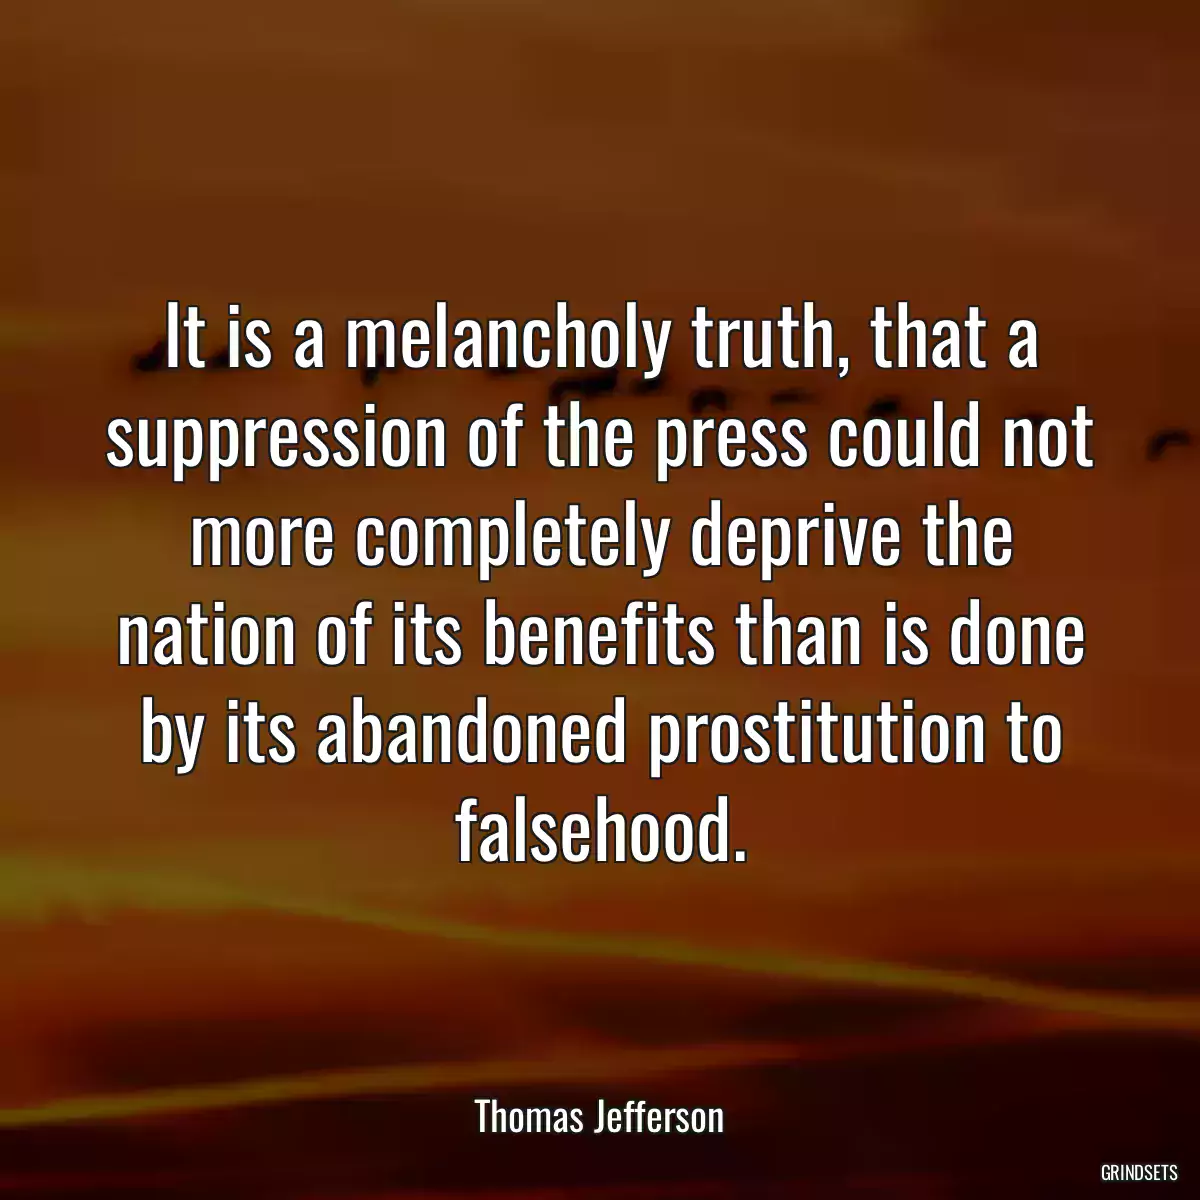 It is a melancholy truth, that a suppression of the press could not more completely deprive the nation of its benefits than is done by its abandoned prostitution to falsehood.